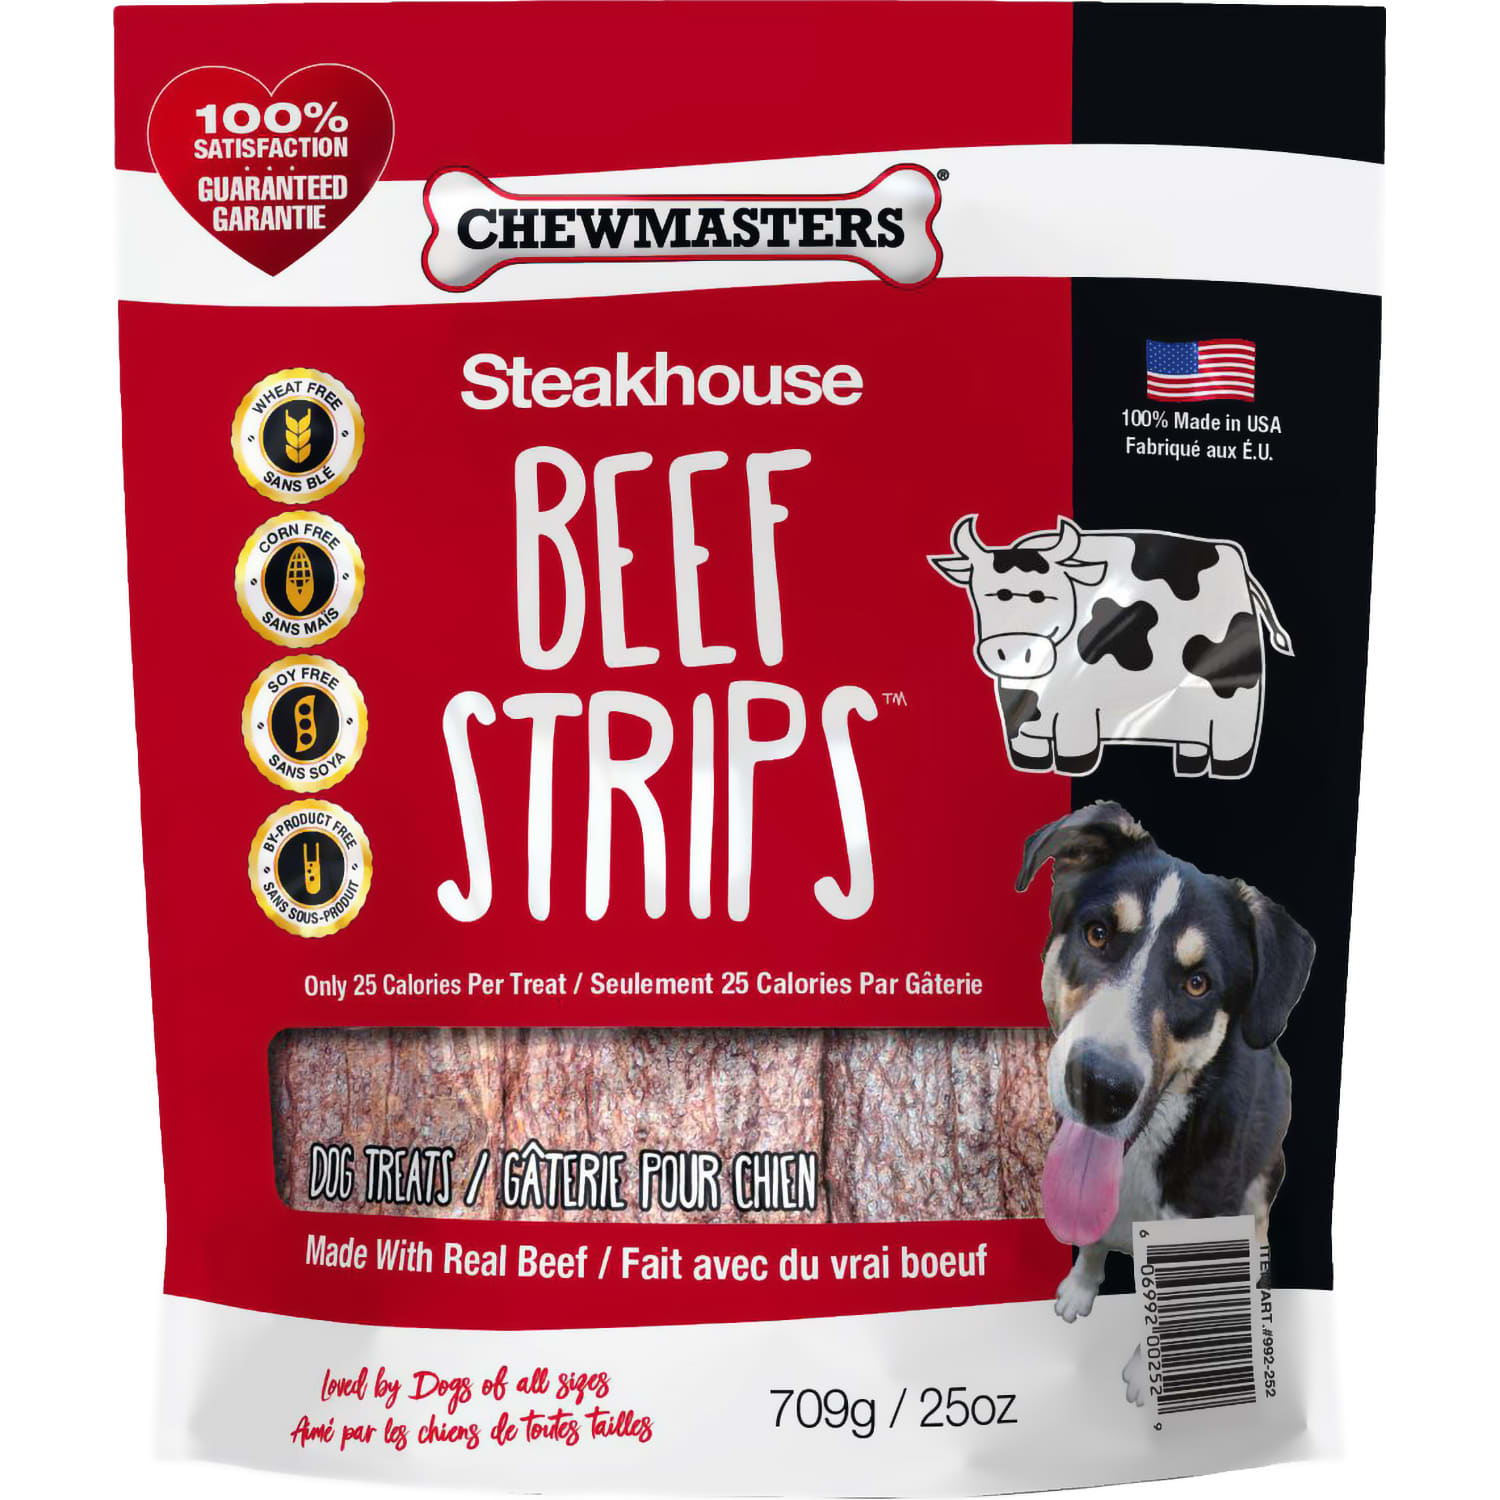 Chewmasters Steakhouse Beef Strips – 709g